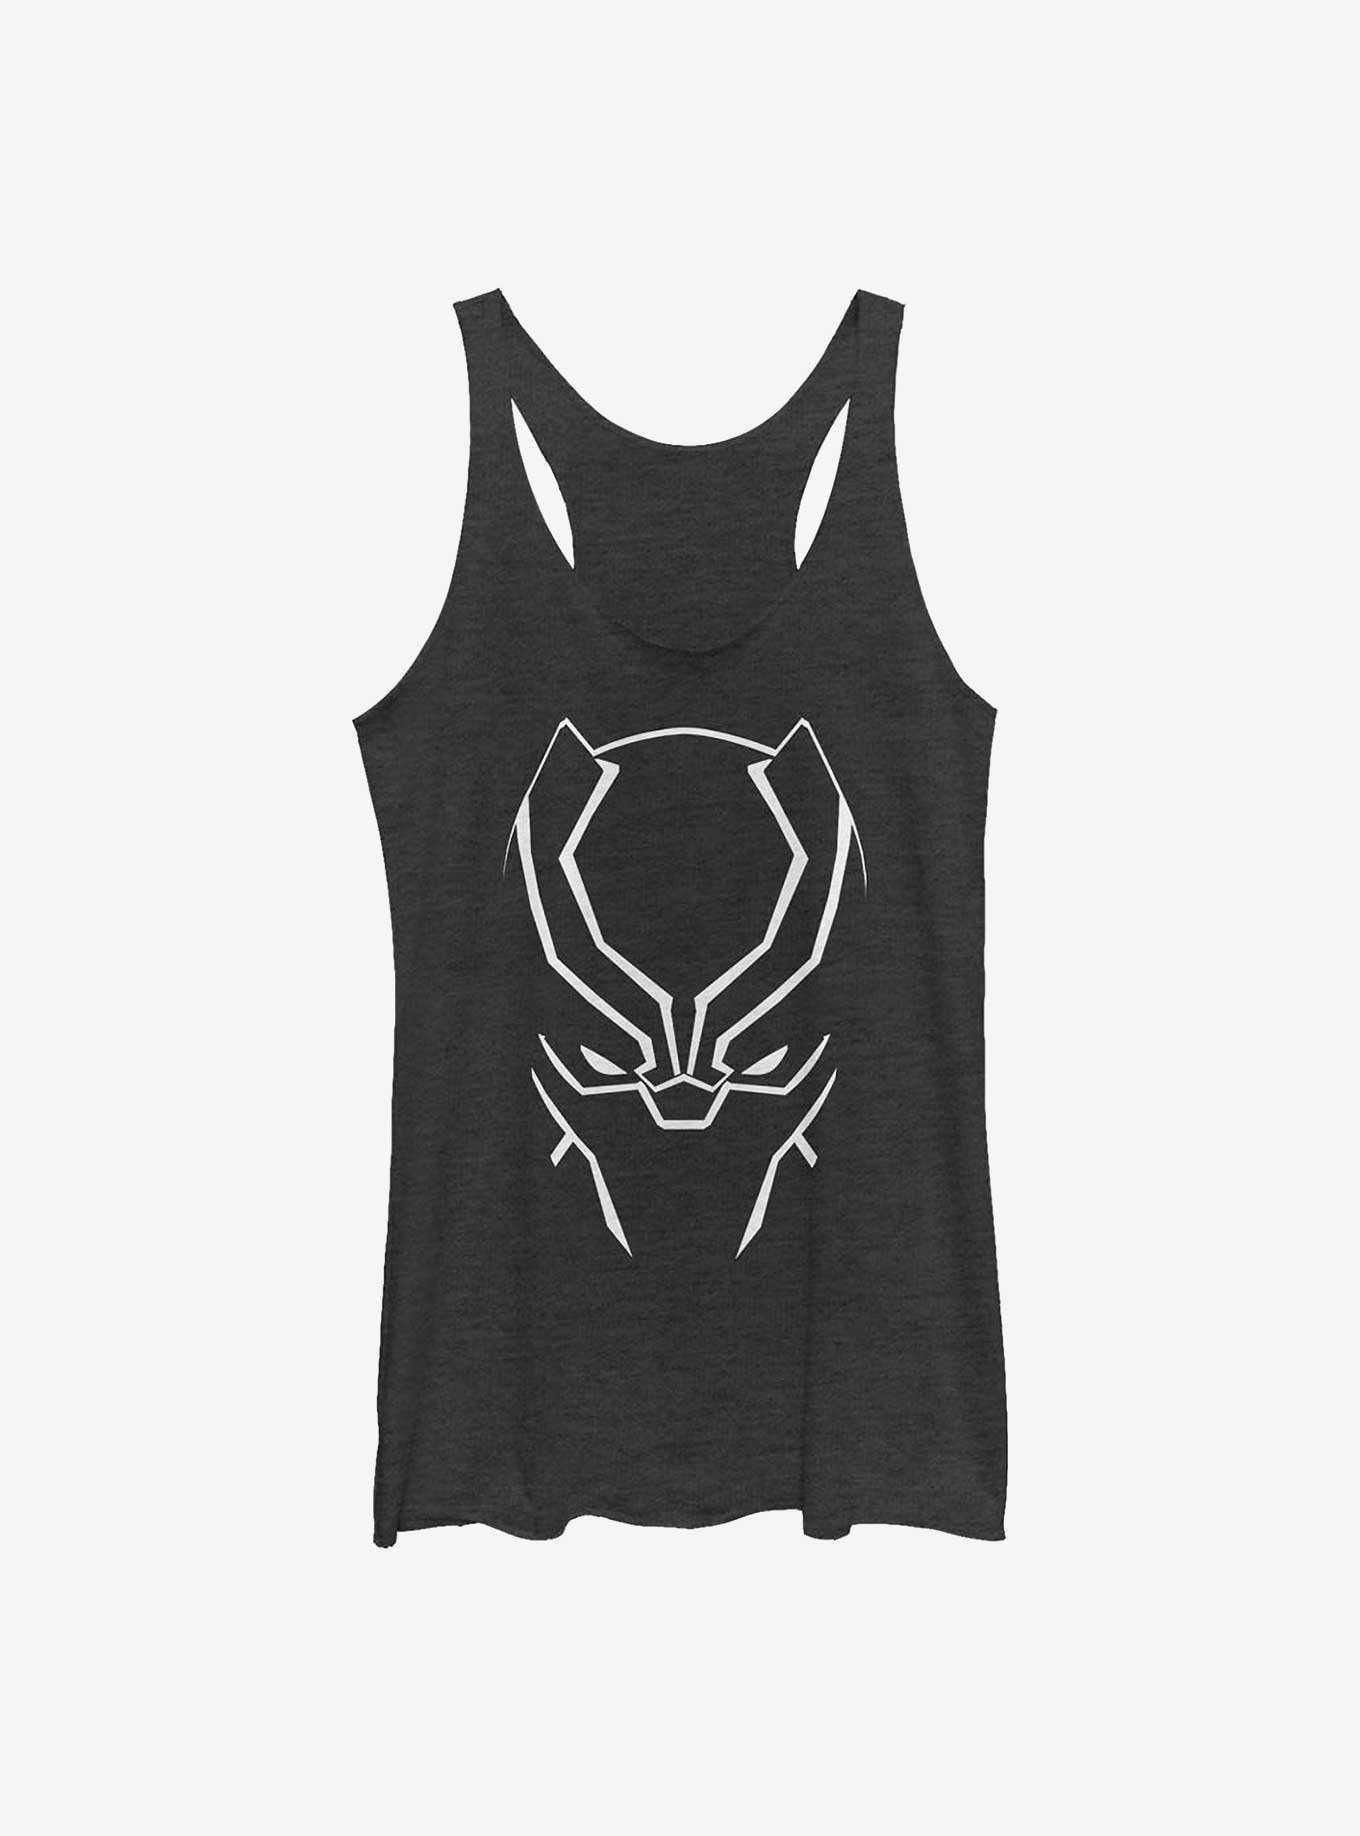 Marvel Black Panther In The Shadows Girls Tank, , hi-res